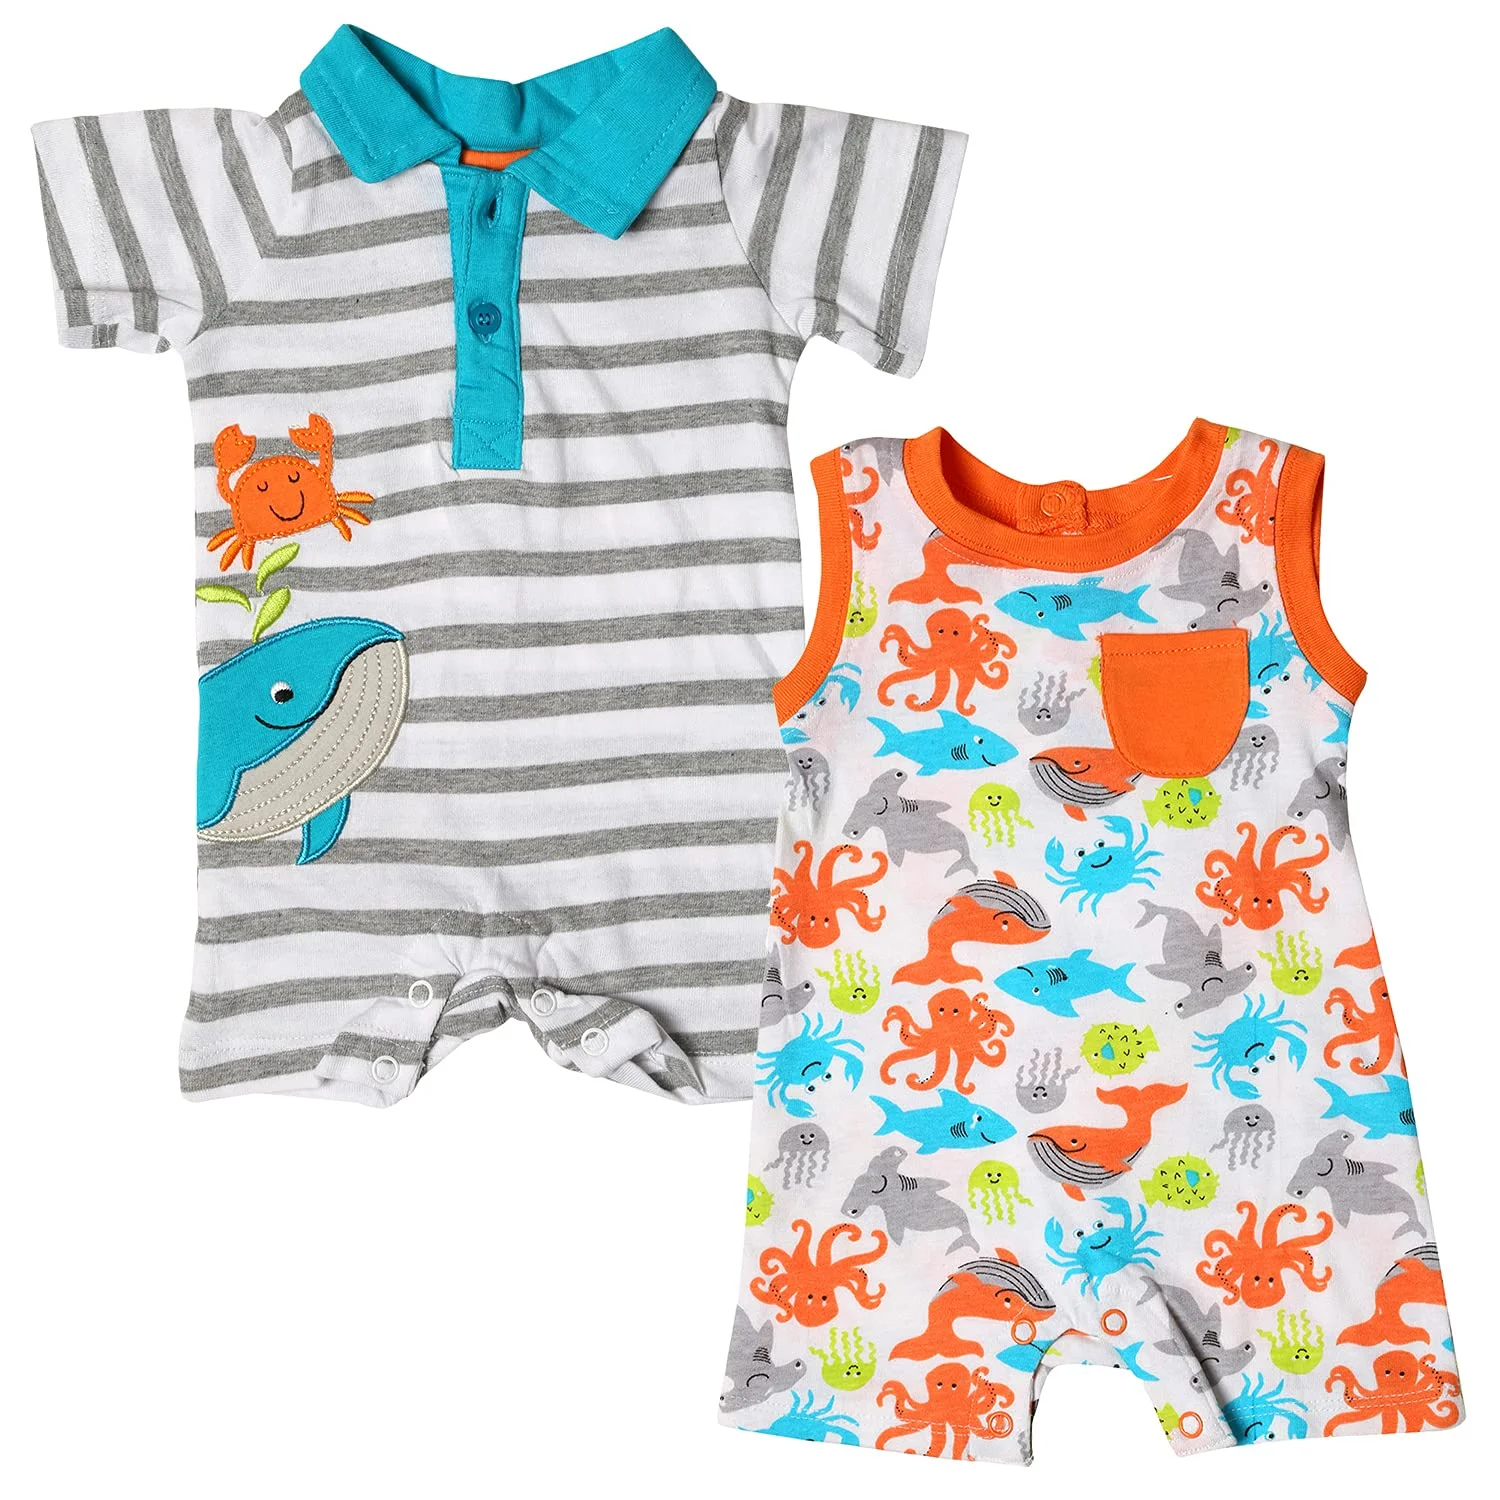 Infant Wear - Bangladesh Factory, Suppliers, Manufacturers